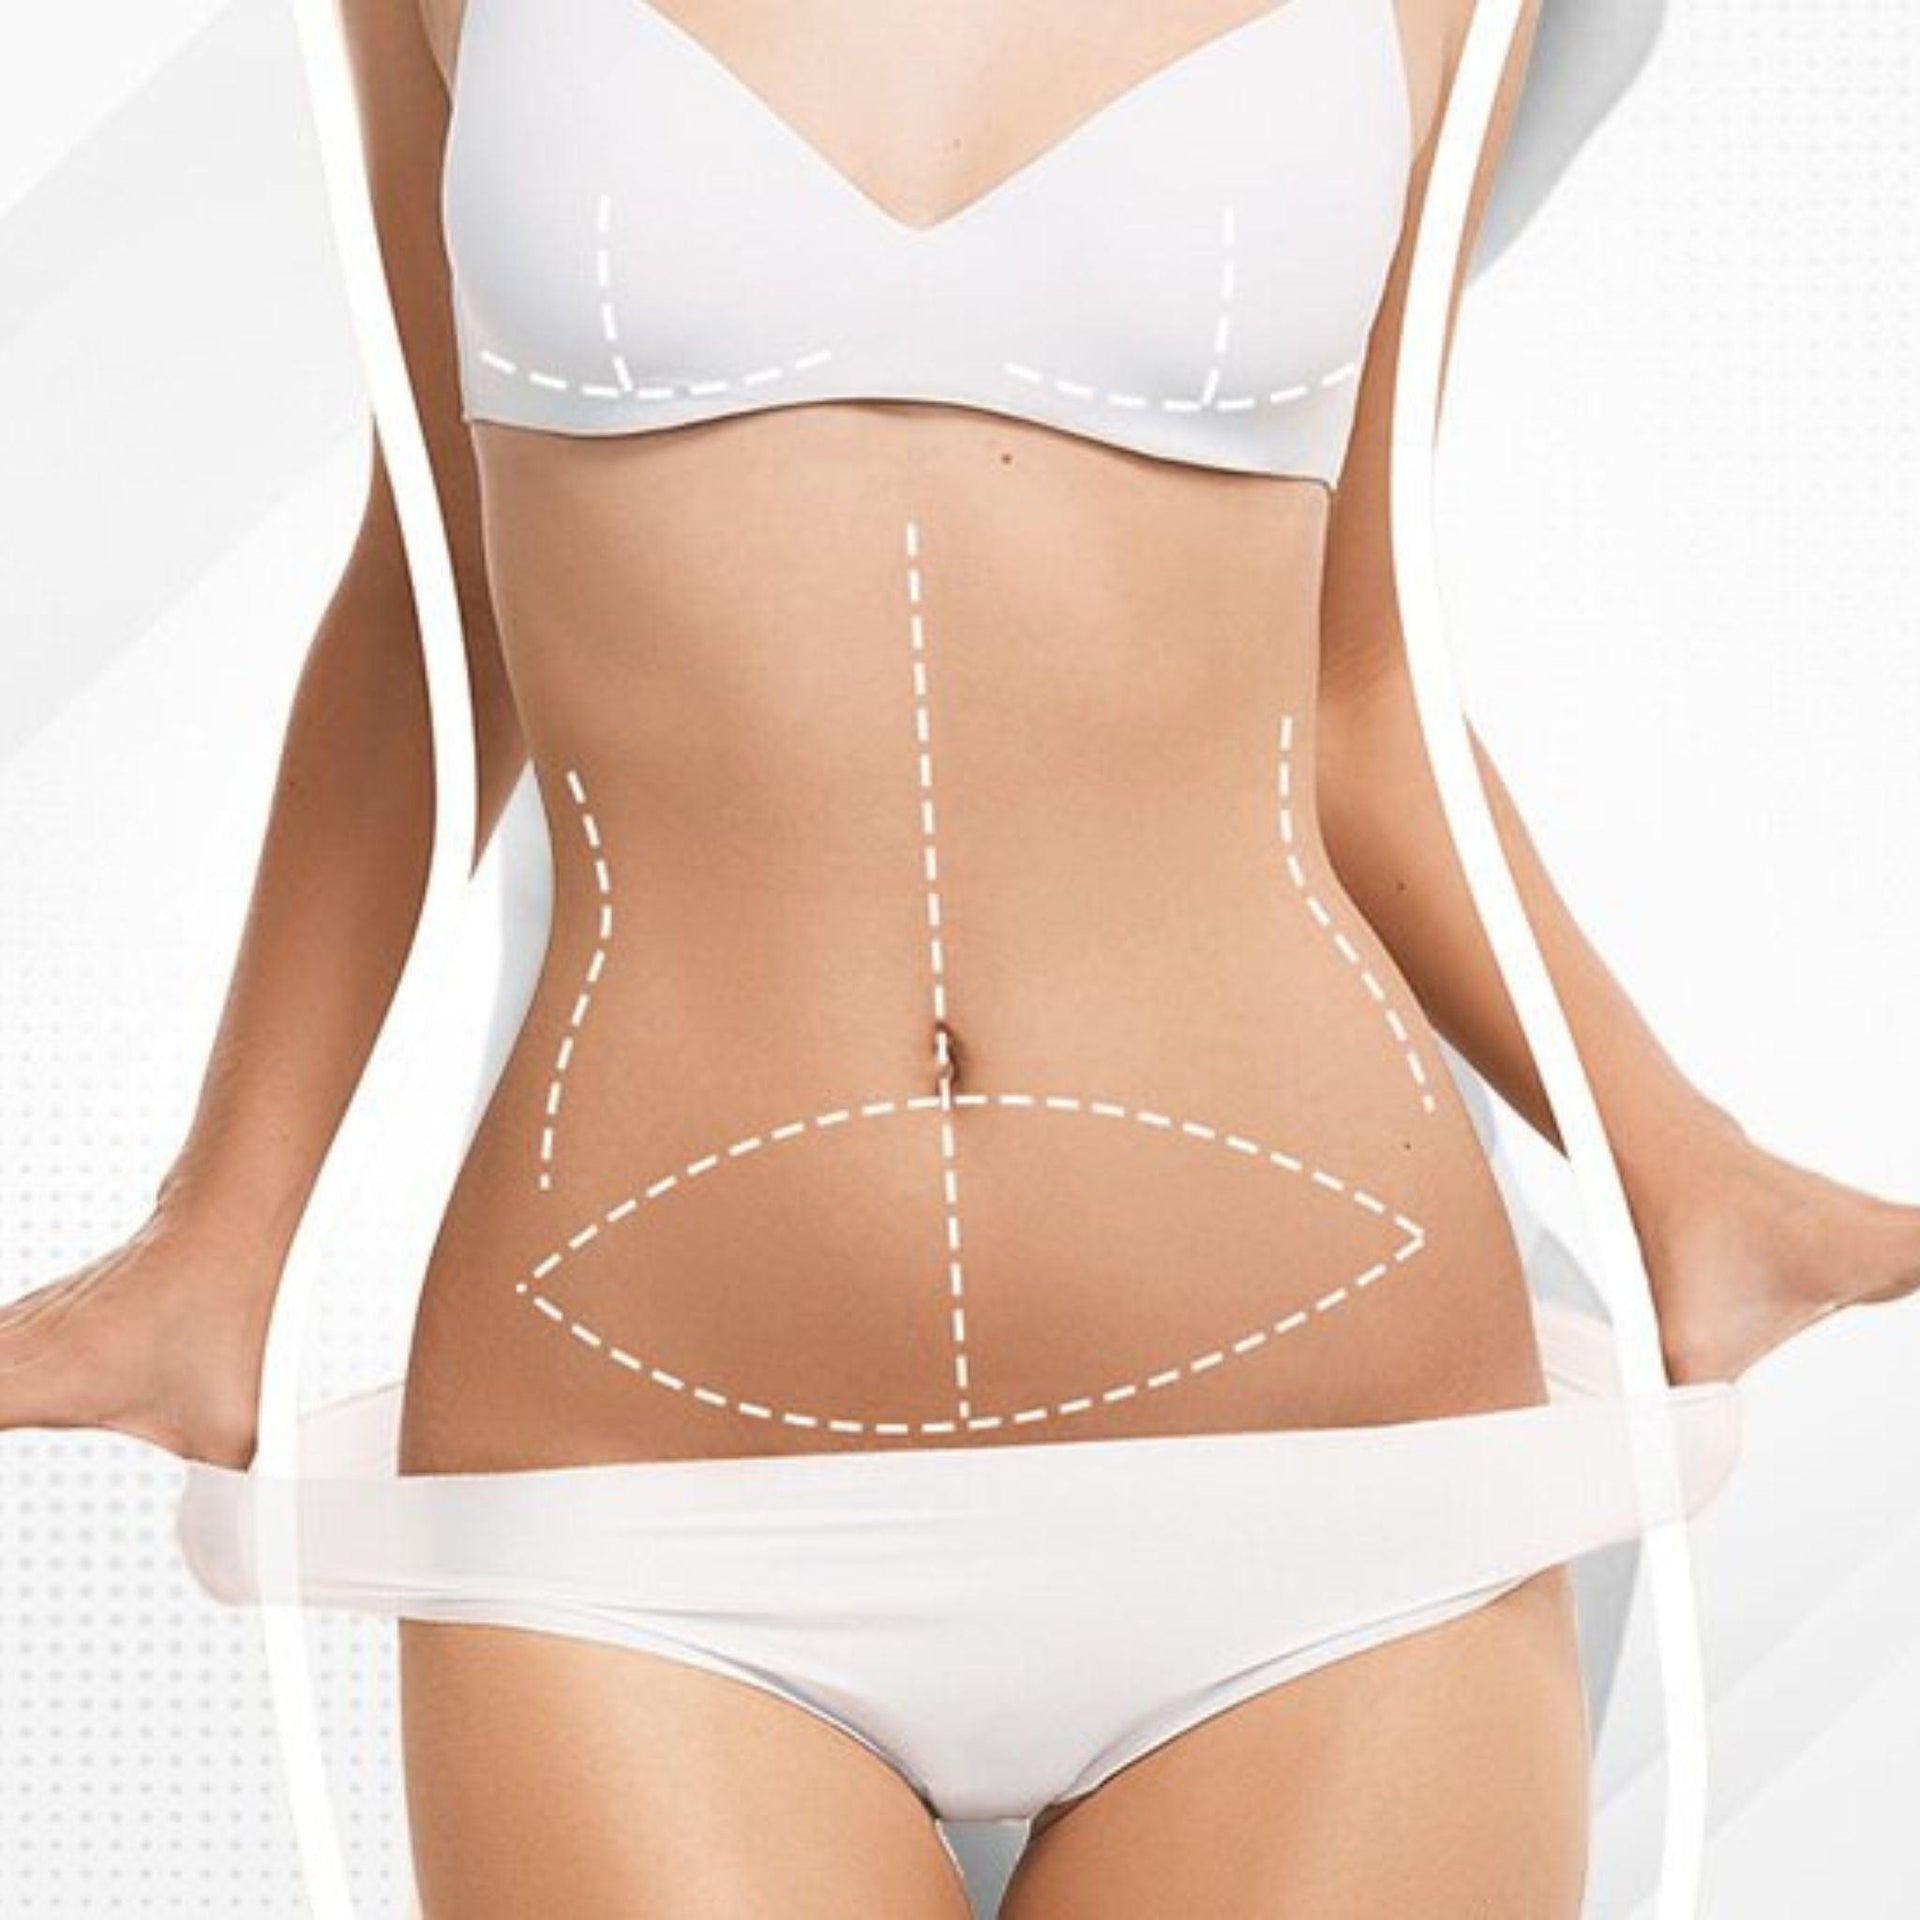 GETTING A BBL, TUMMY TUCK, GENDER SELECTION